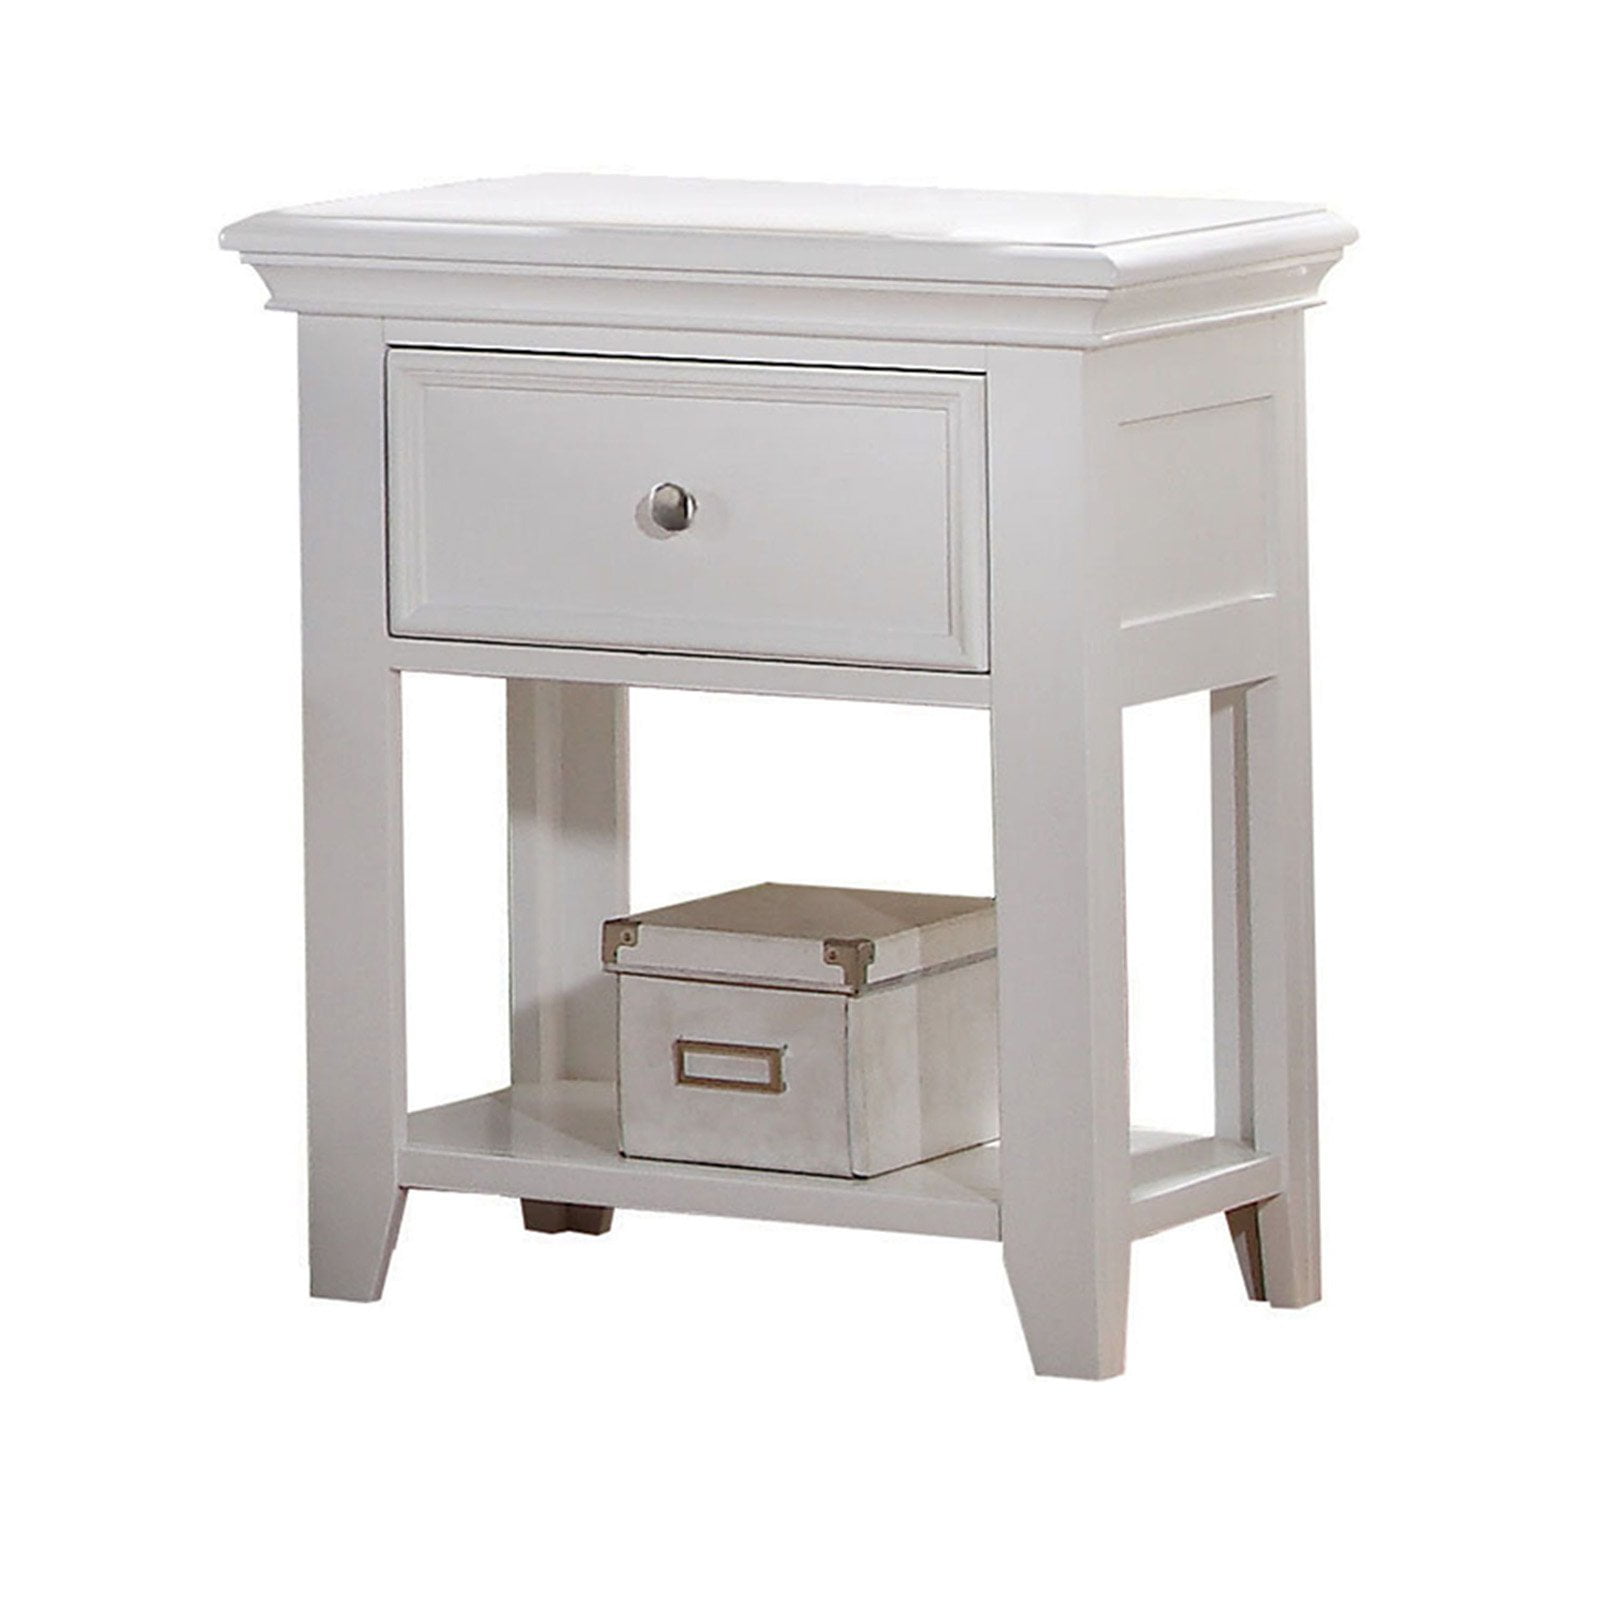 Picture of ACME 30598 Lacey Nightstand, White - 27 x 22 x 16 in.